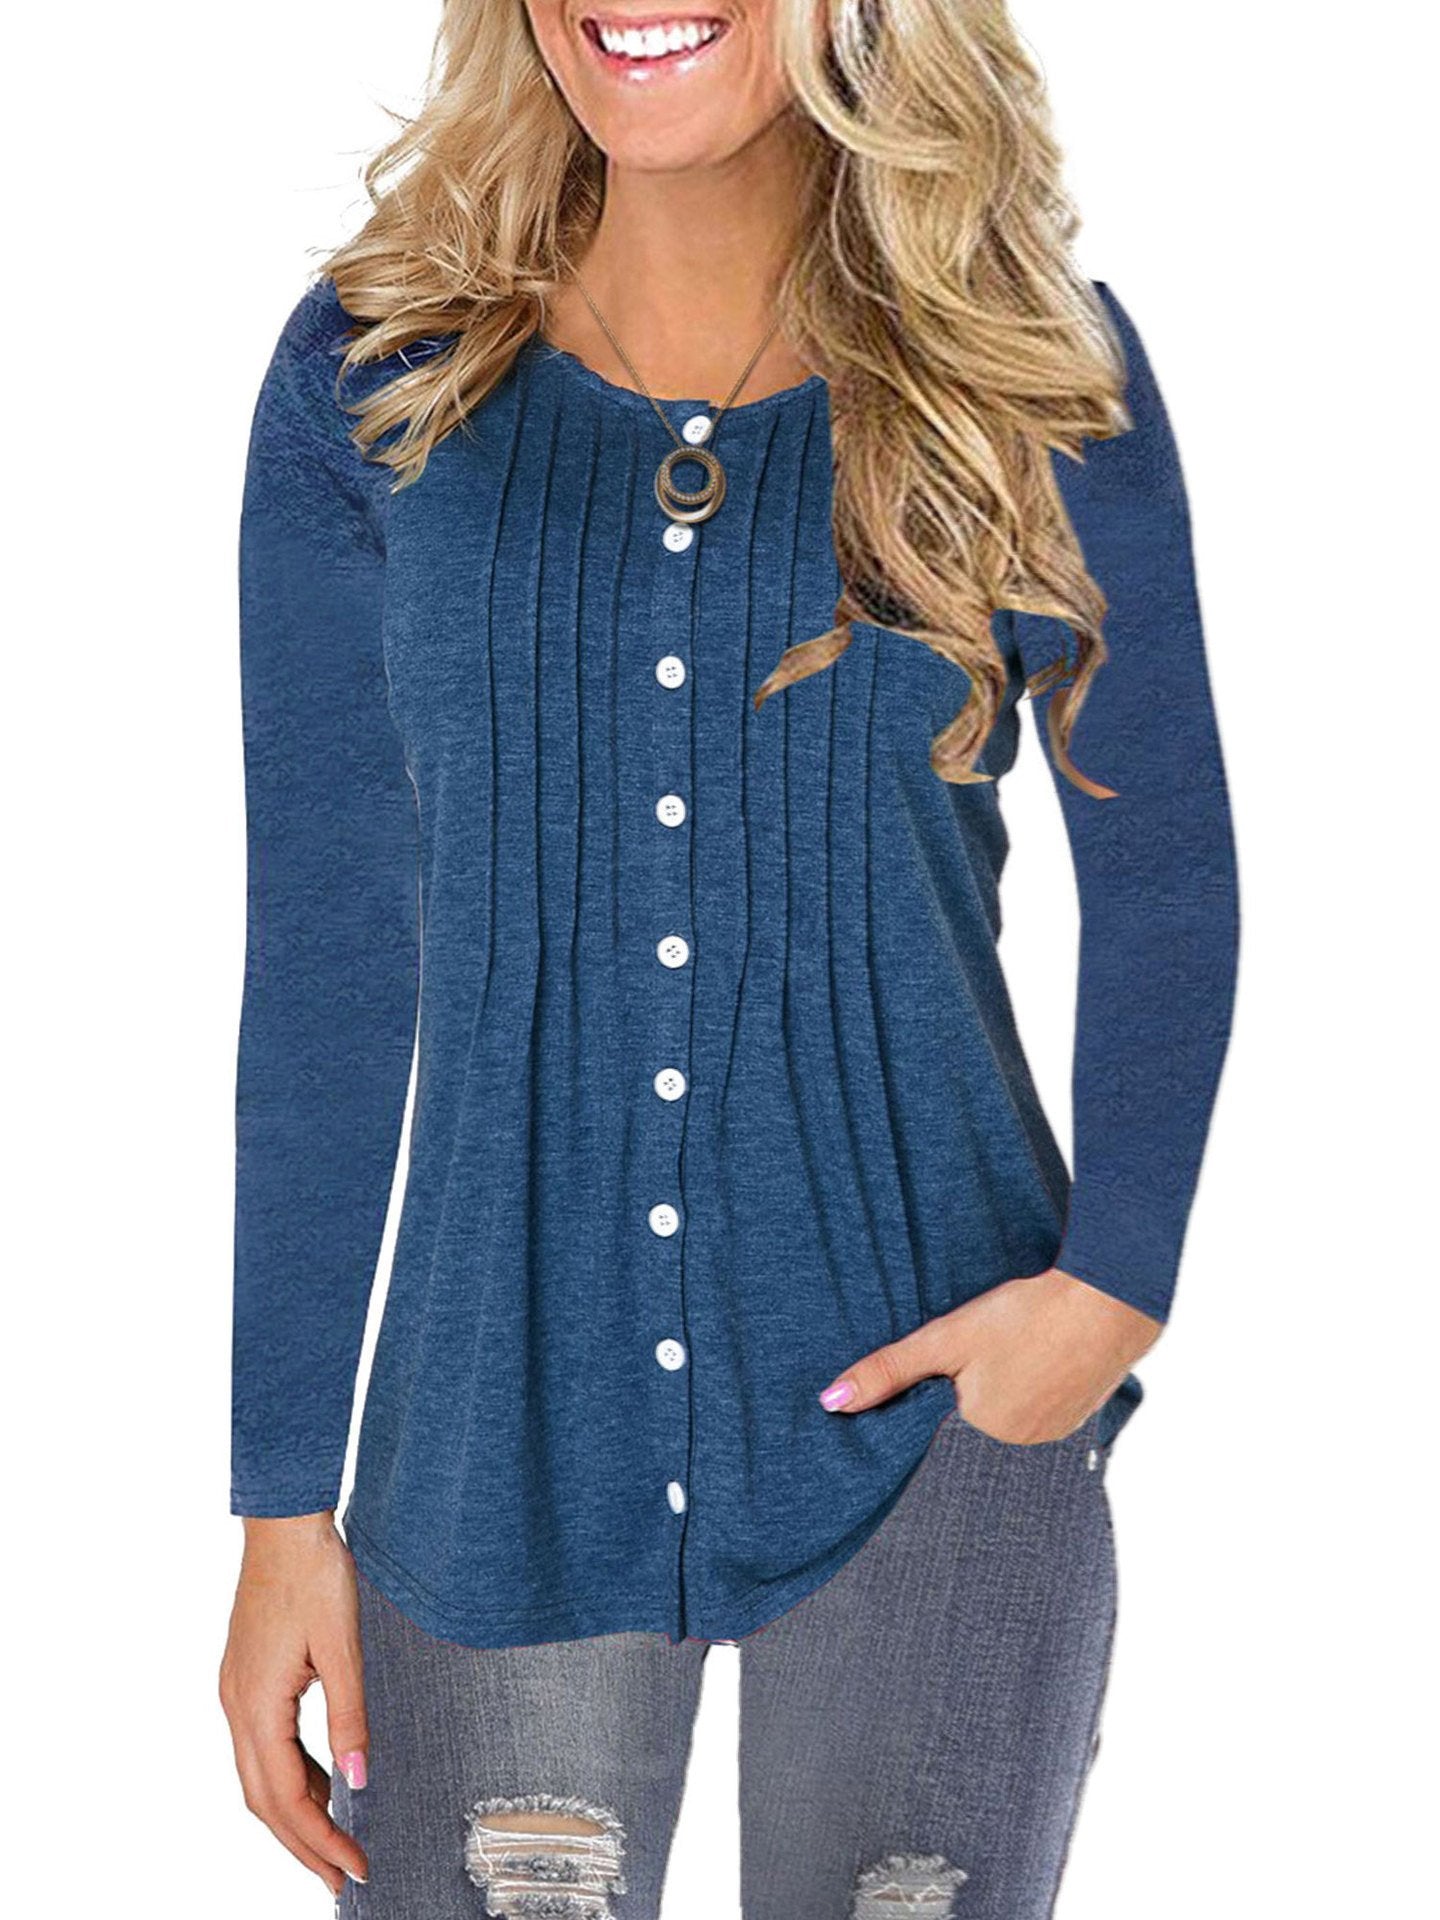 Women's Round Collar Solid Color Casual Long Sleeve Top